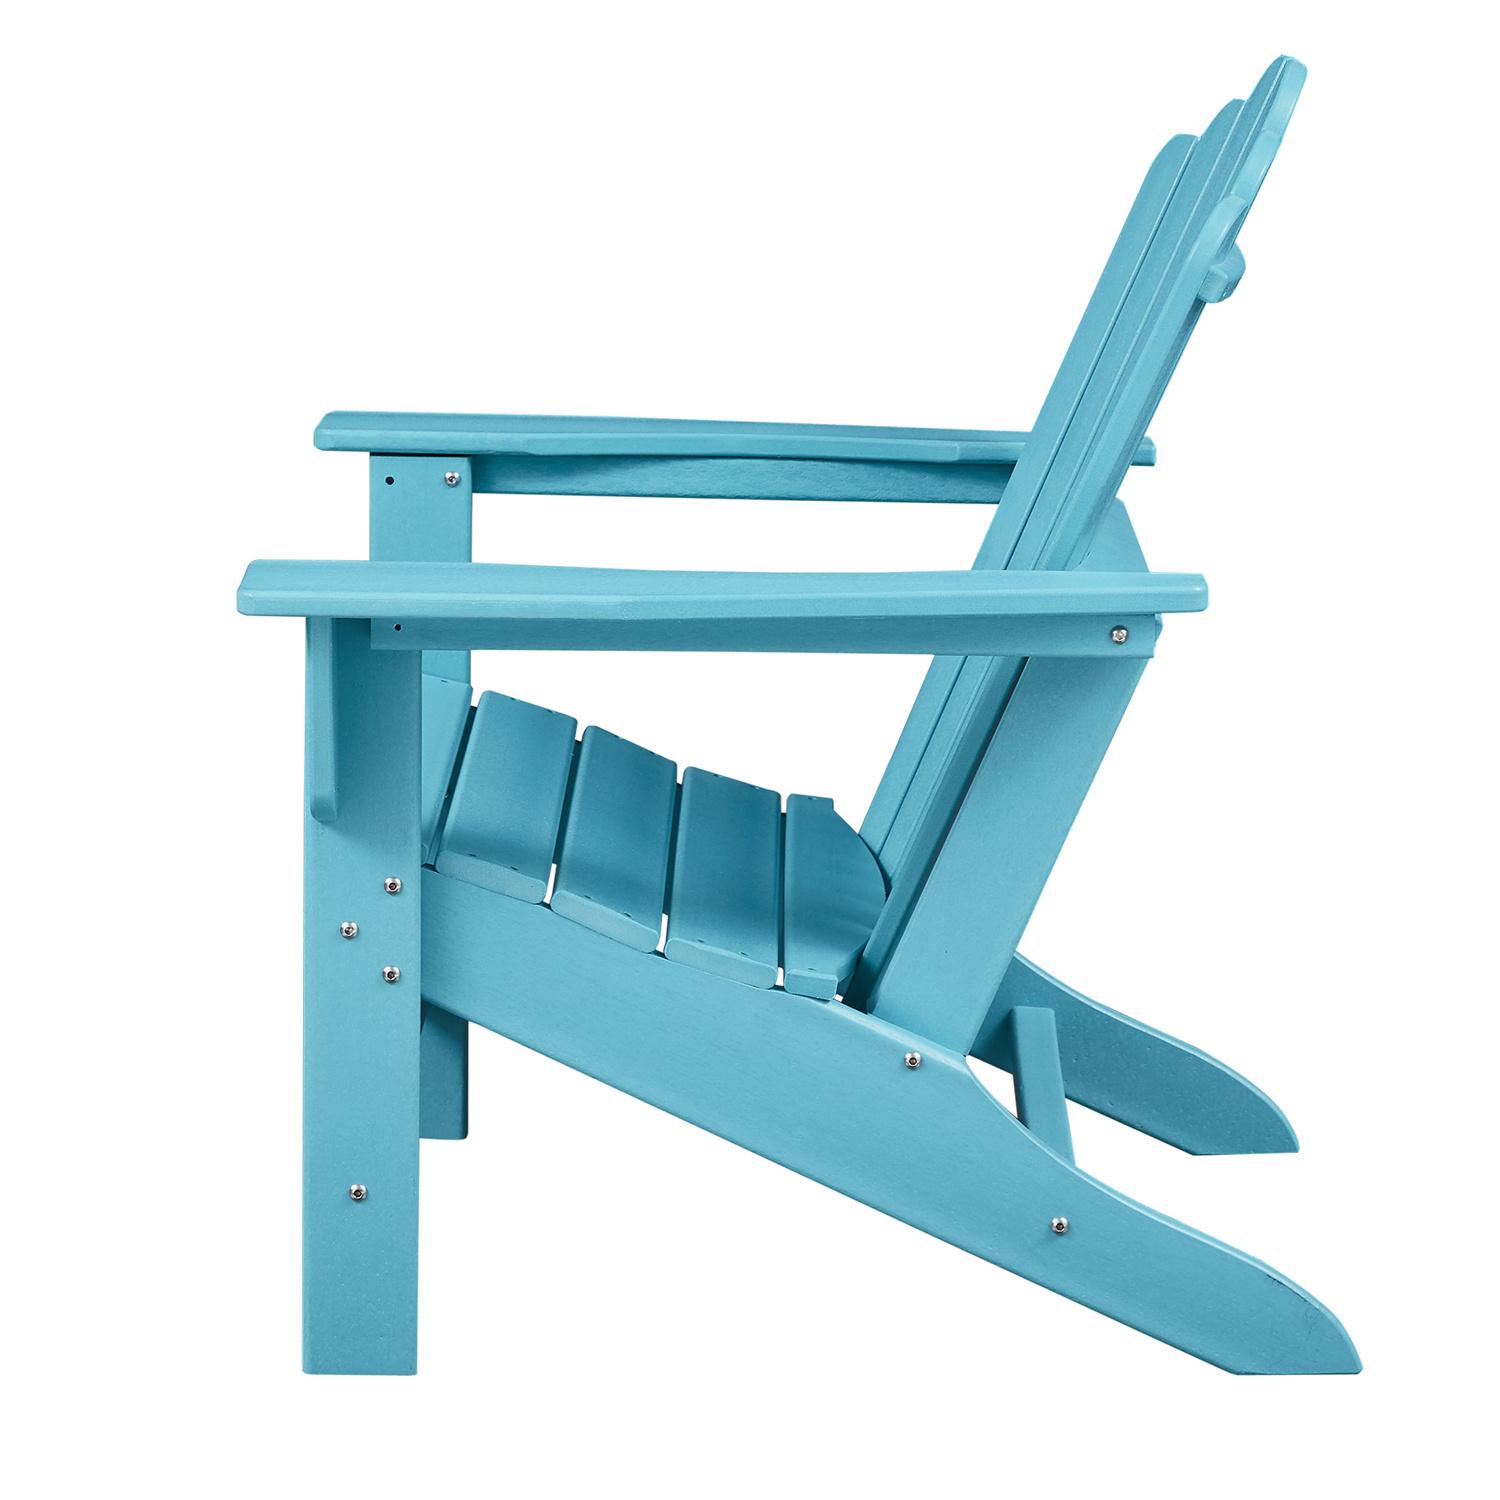 Adirondack Chair Patio Chairs Lawn Chair Outdoor Chairs Painted Chair Weather Resistant for Patio Deck Garden, Backyard Deck, Fire Pit & Lawn Furniture Porch and Lawn Seating- Blue - image 3 of 7